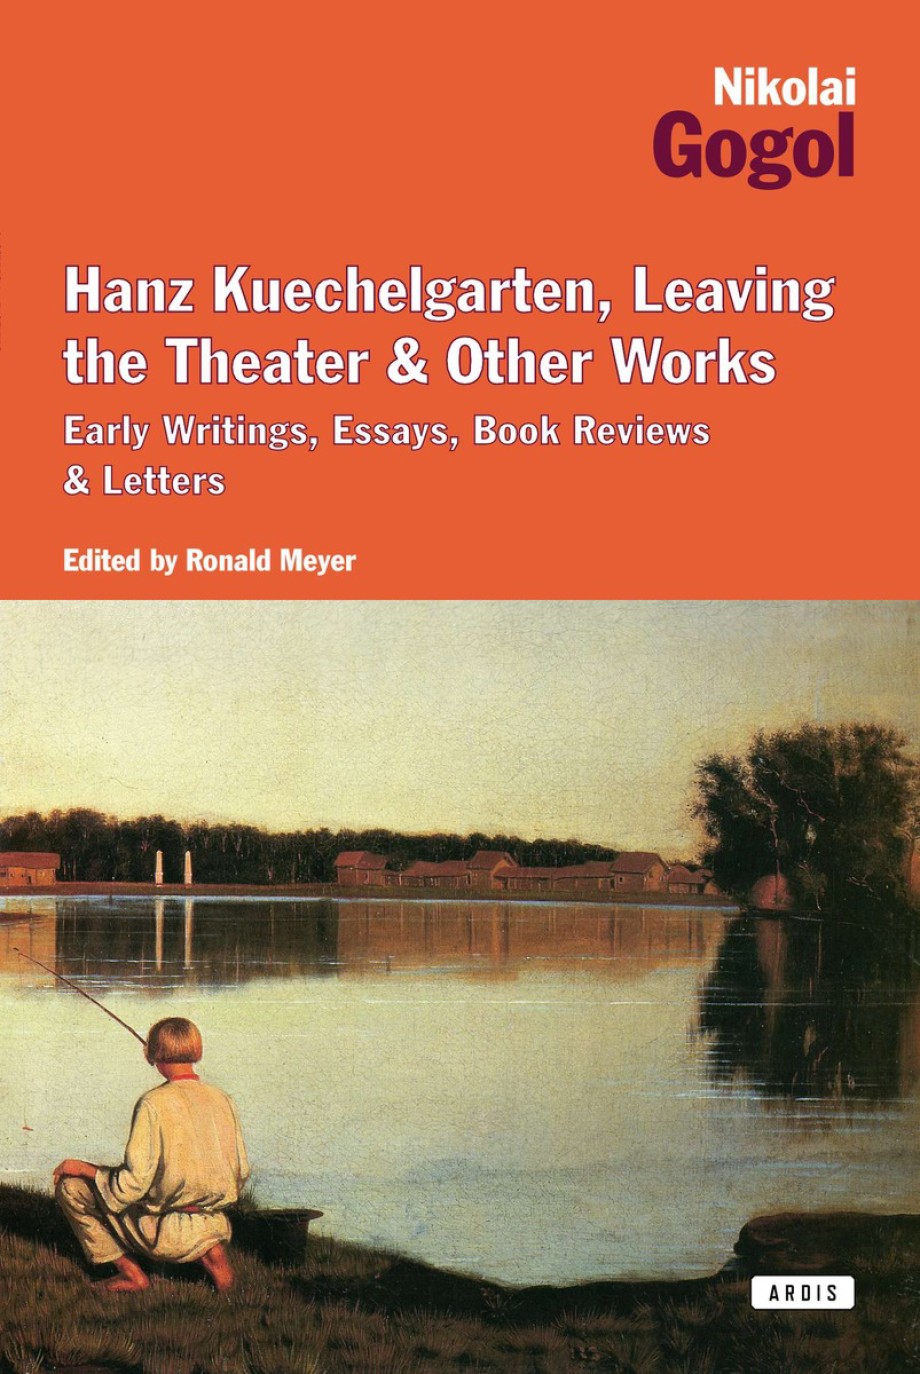 Hanz Kuechelgarten, Leaving the Theater & Other Works Early Writings, Essays, Book Reviews & Letters